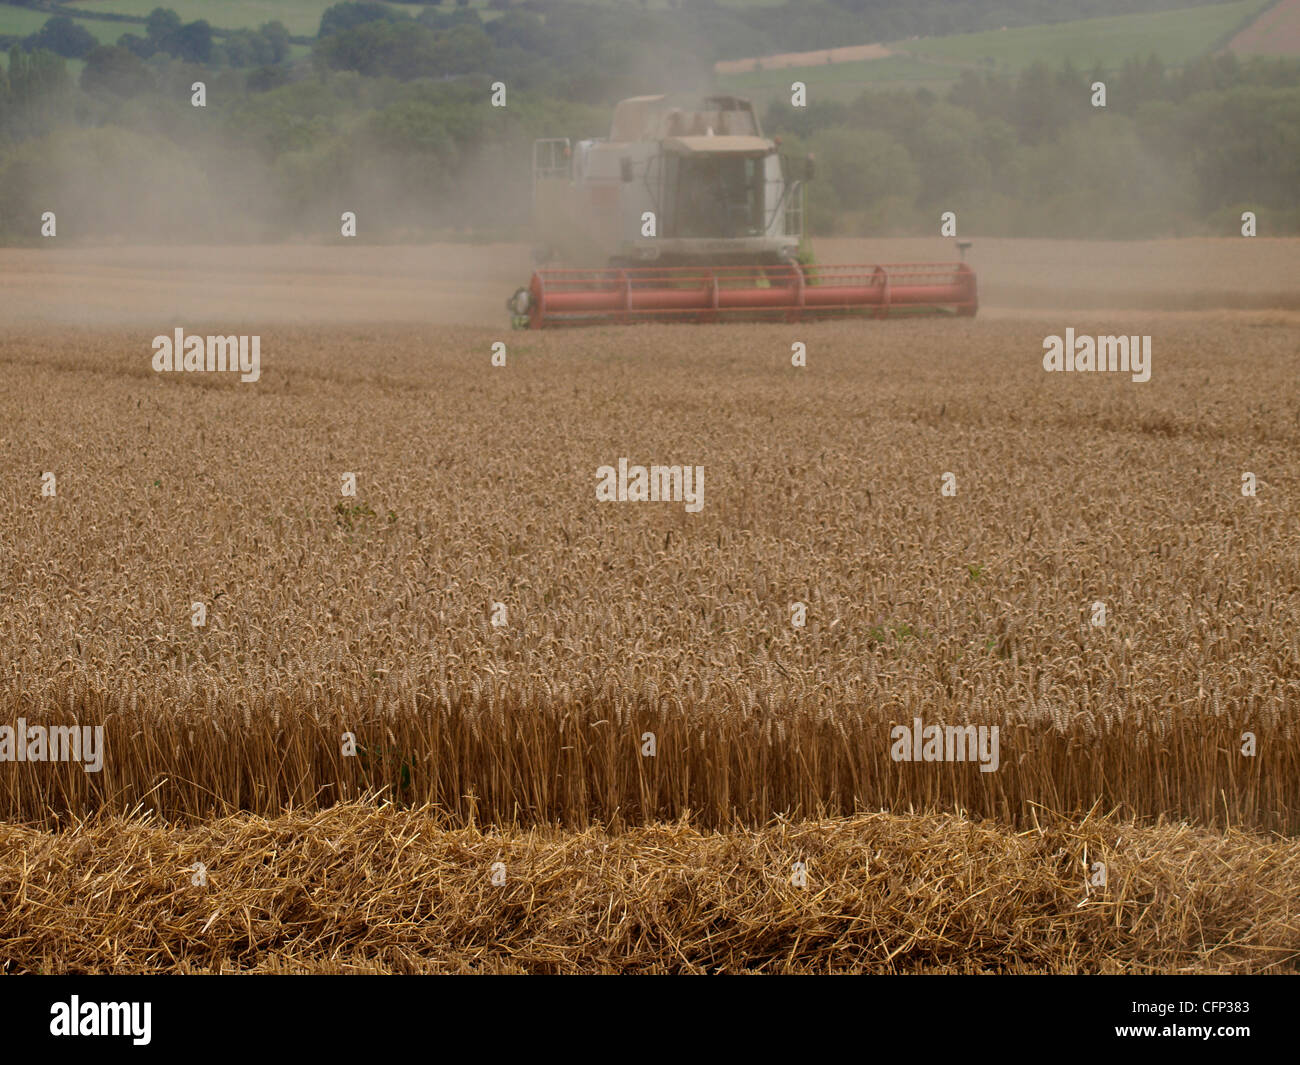 Farmer combining his crops creating lots of dust, UK Stock Photo